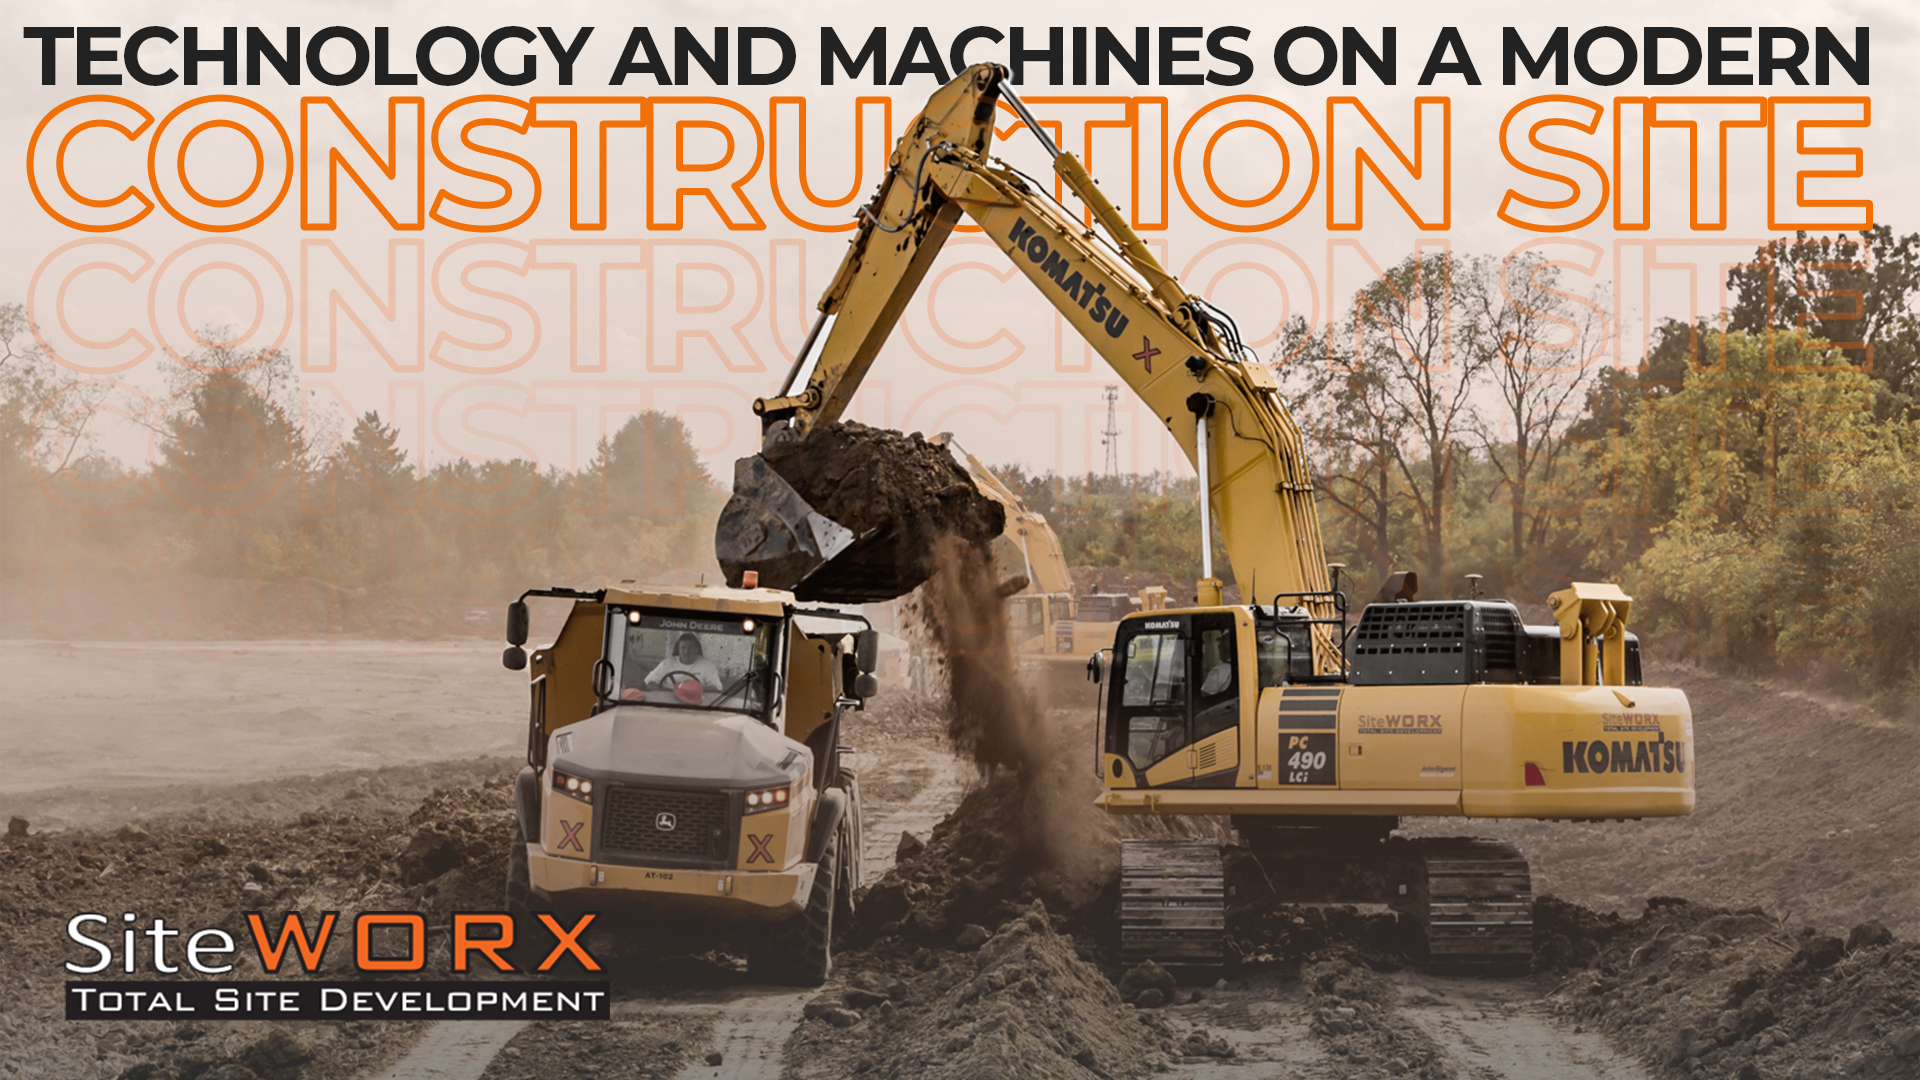 Construction equipment shoveling dirt with the text "Technology and Machines on a Modern Construction Site"